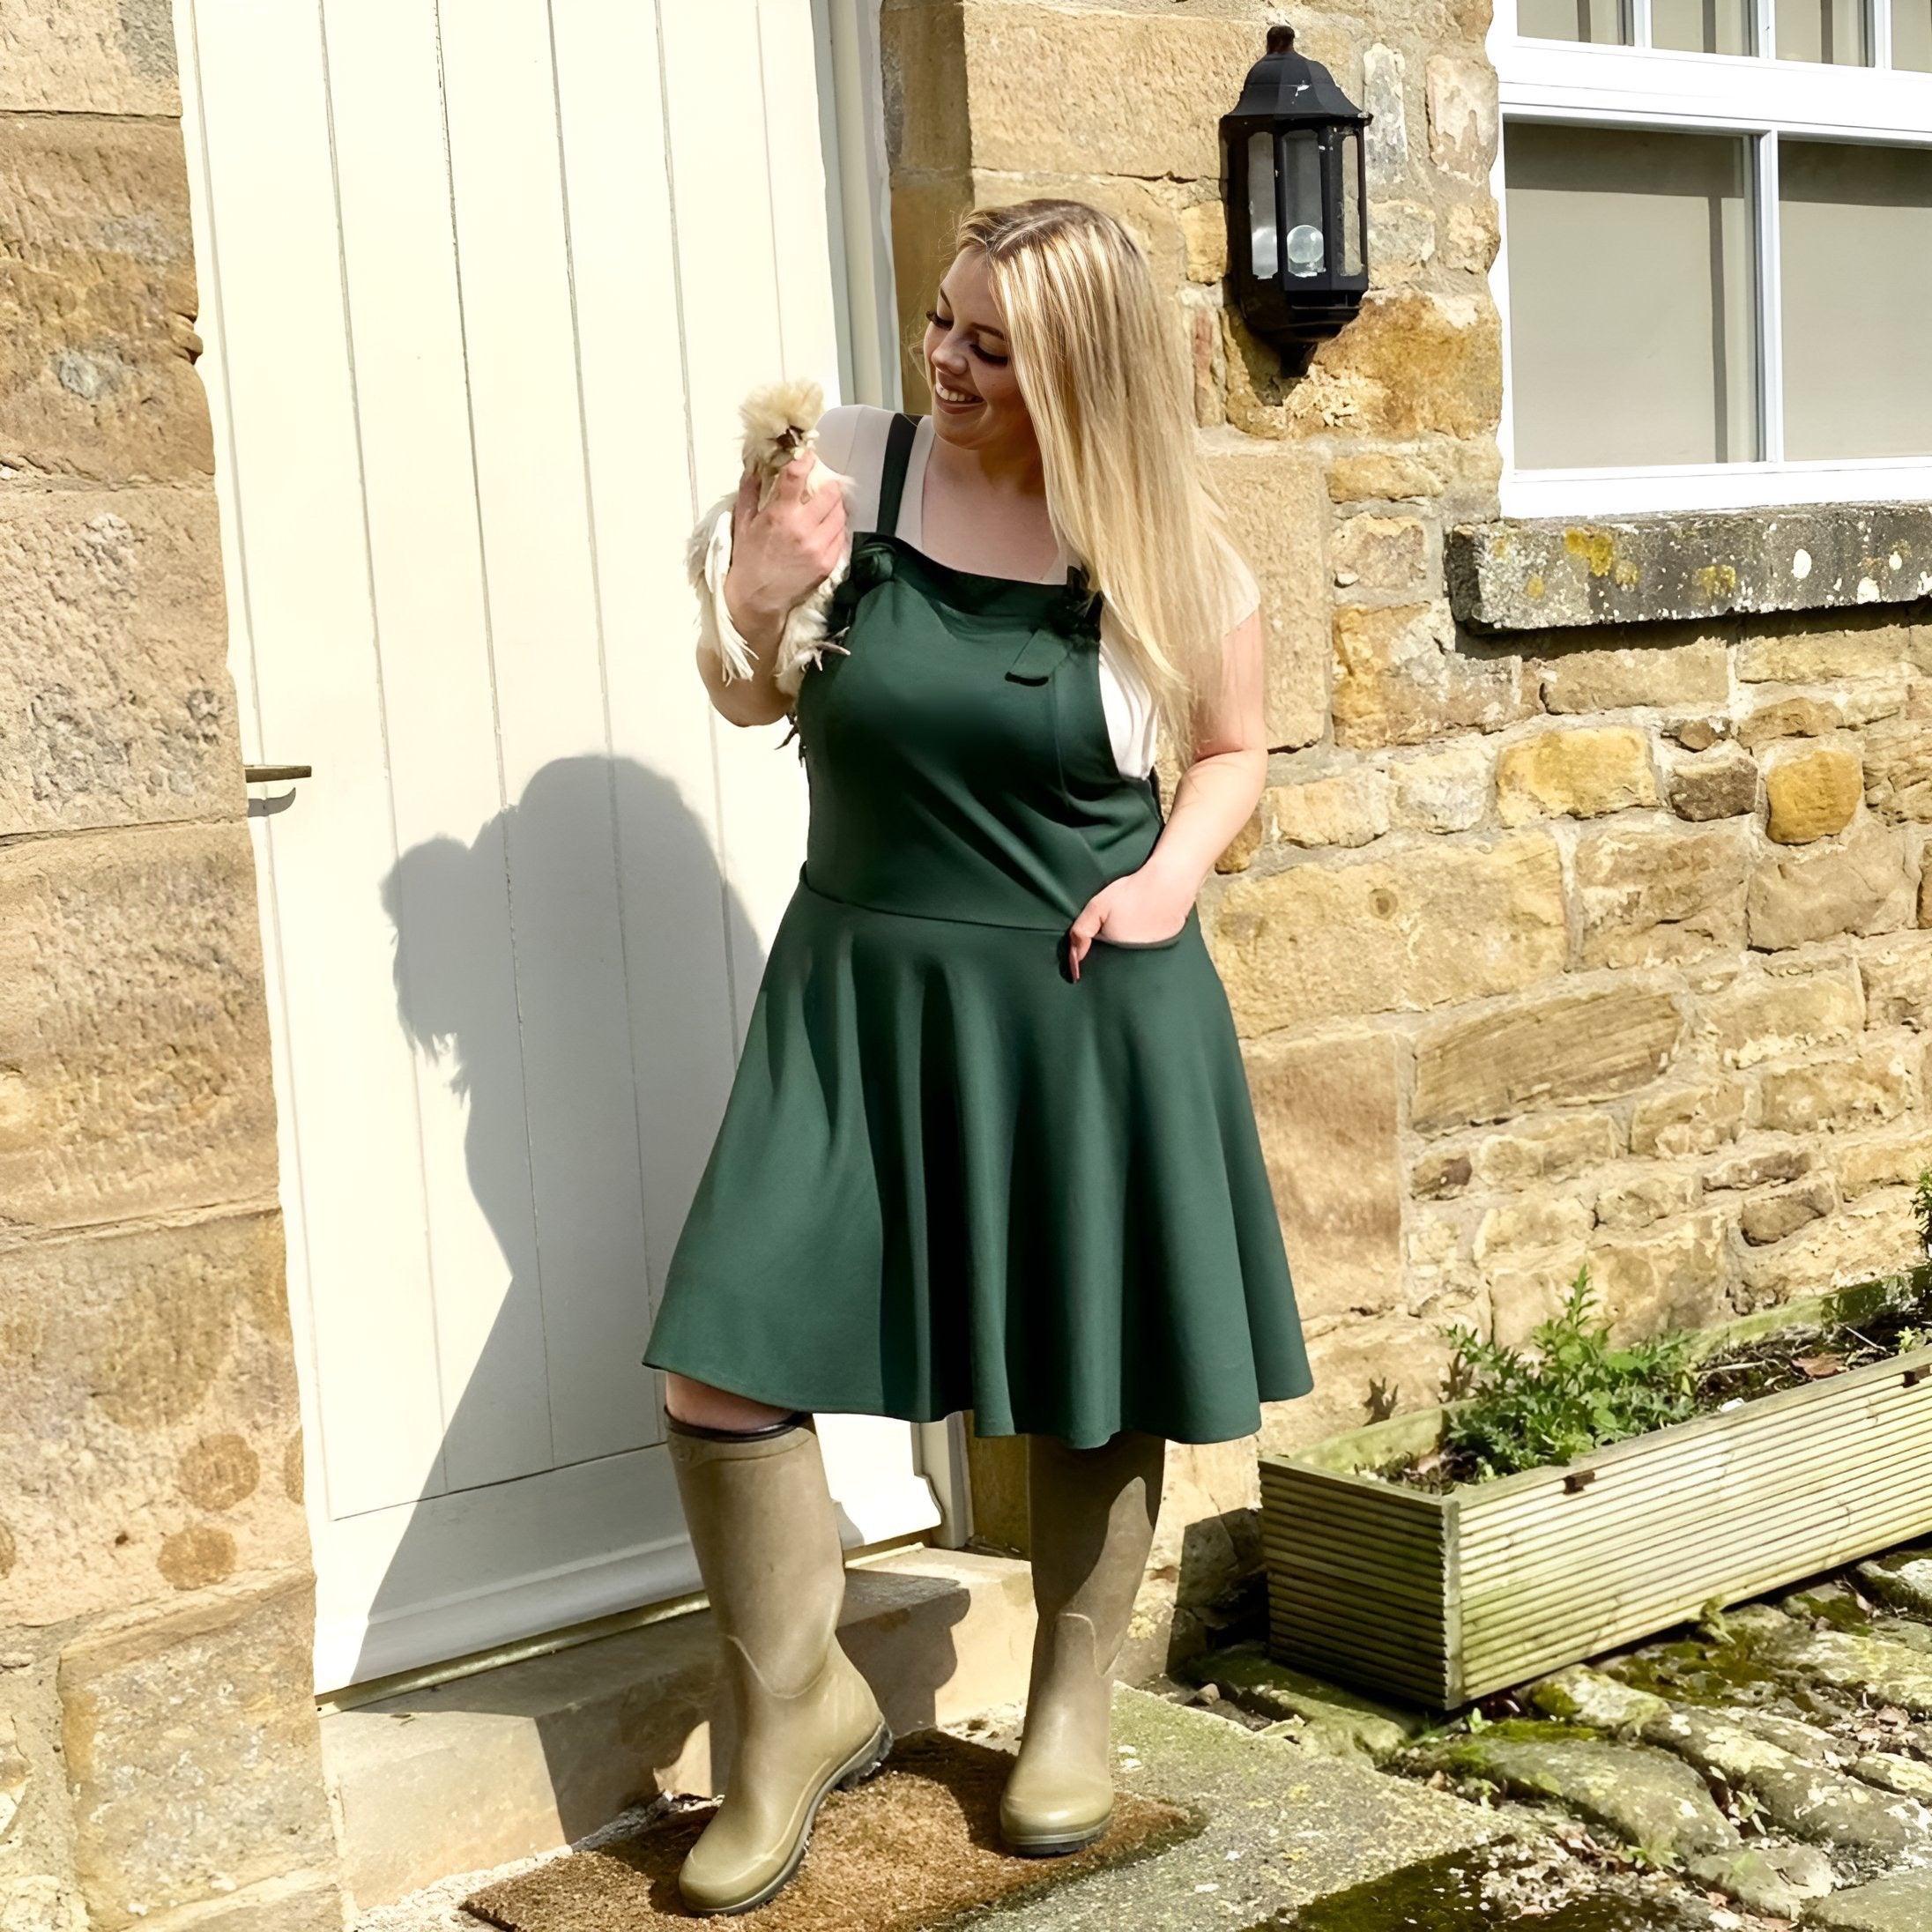 Snagafore Pinafore Dress - Hit the Bottle Green